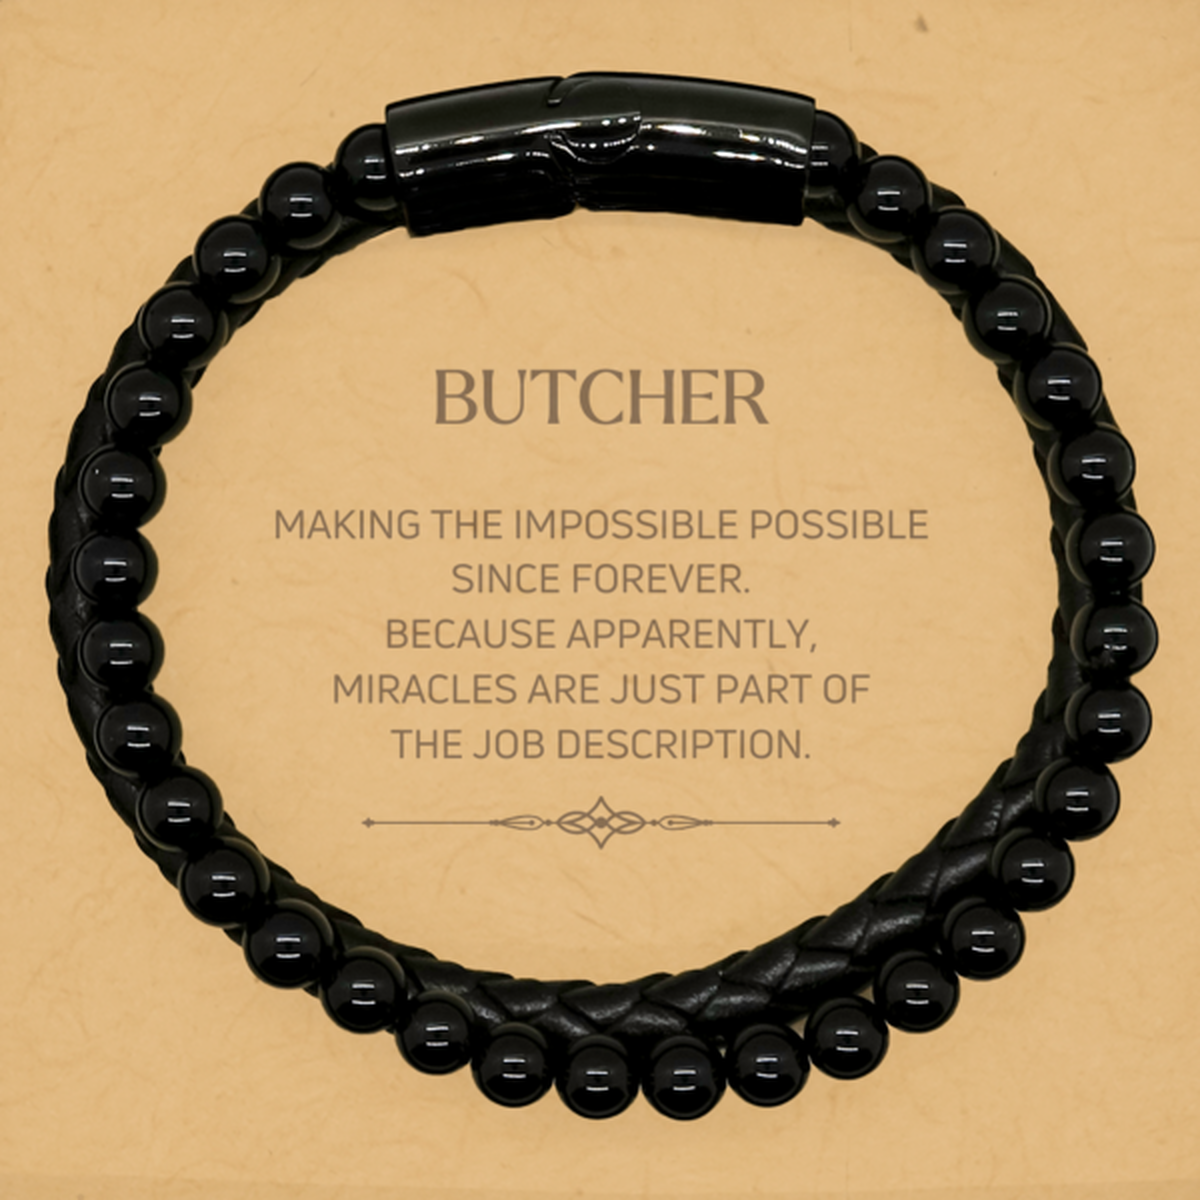 Funny Butcher Gifts, Miracles are just part of the job description, Inspirational Birthday Stone Leather Bracelets For Butcher, Men, Women, Coworkers, Friends, Boss